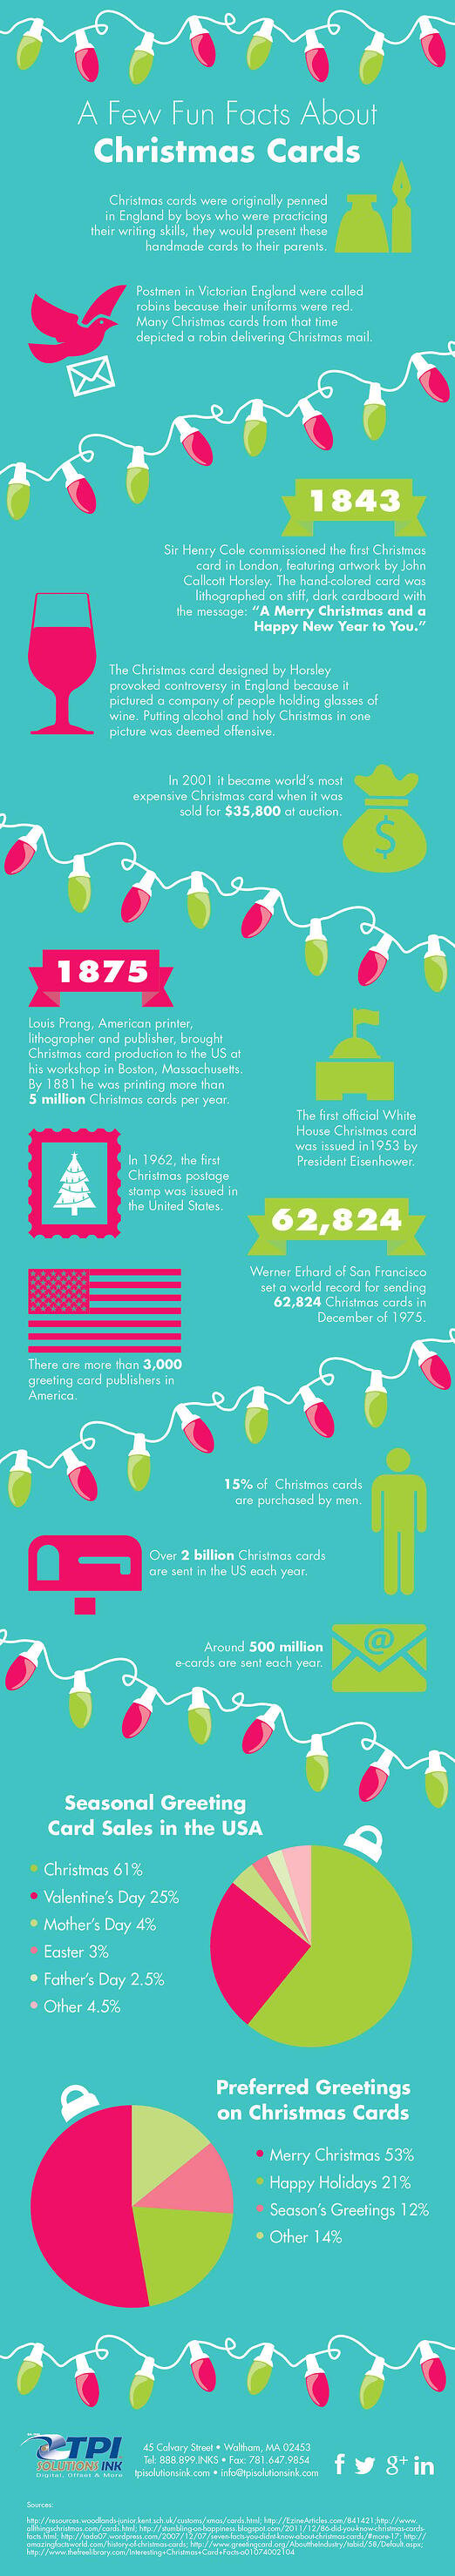 Infographic: Christmas Card Fun Facts